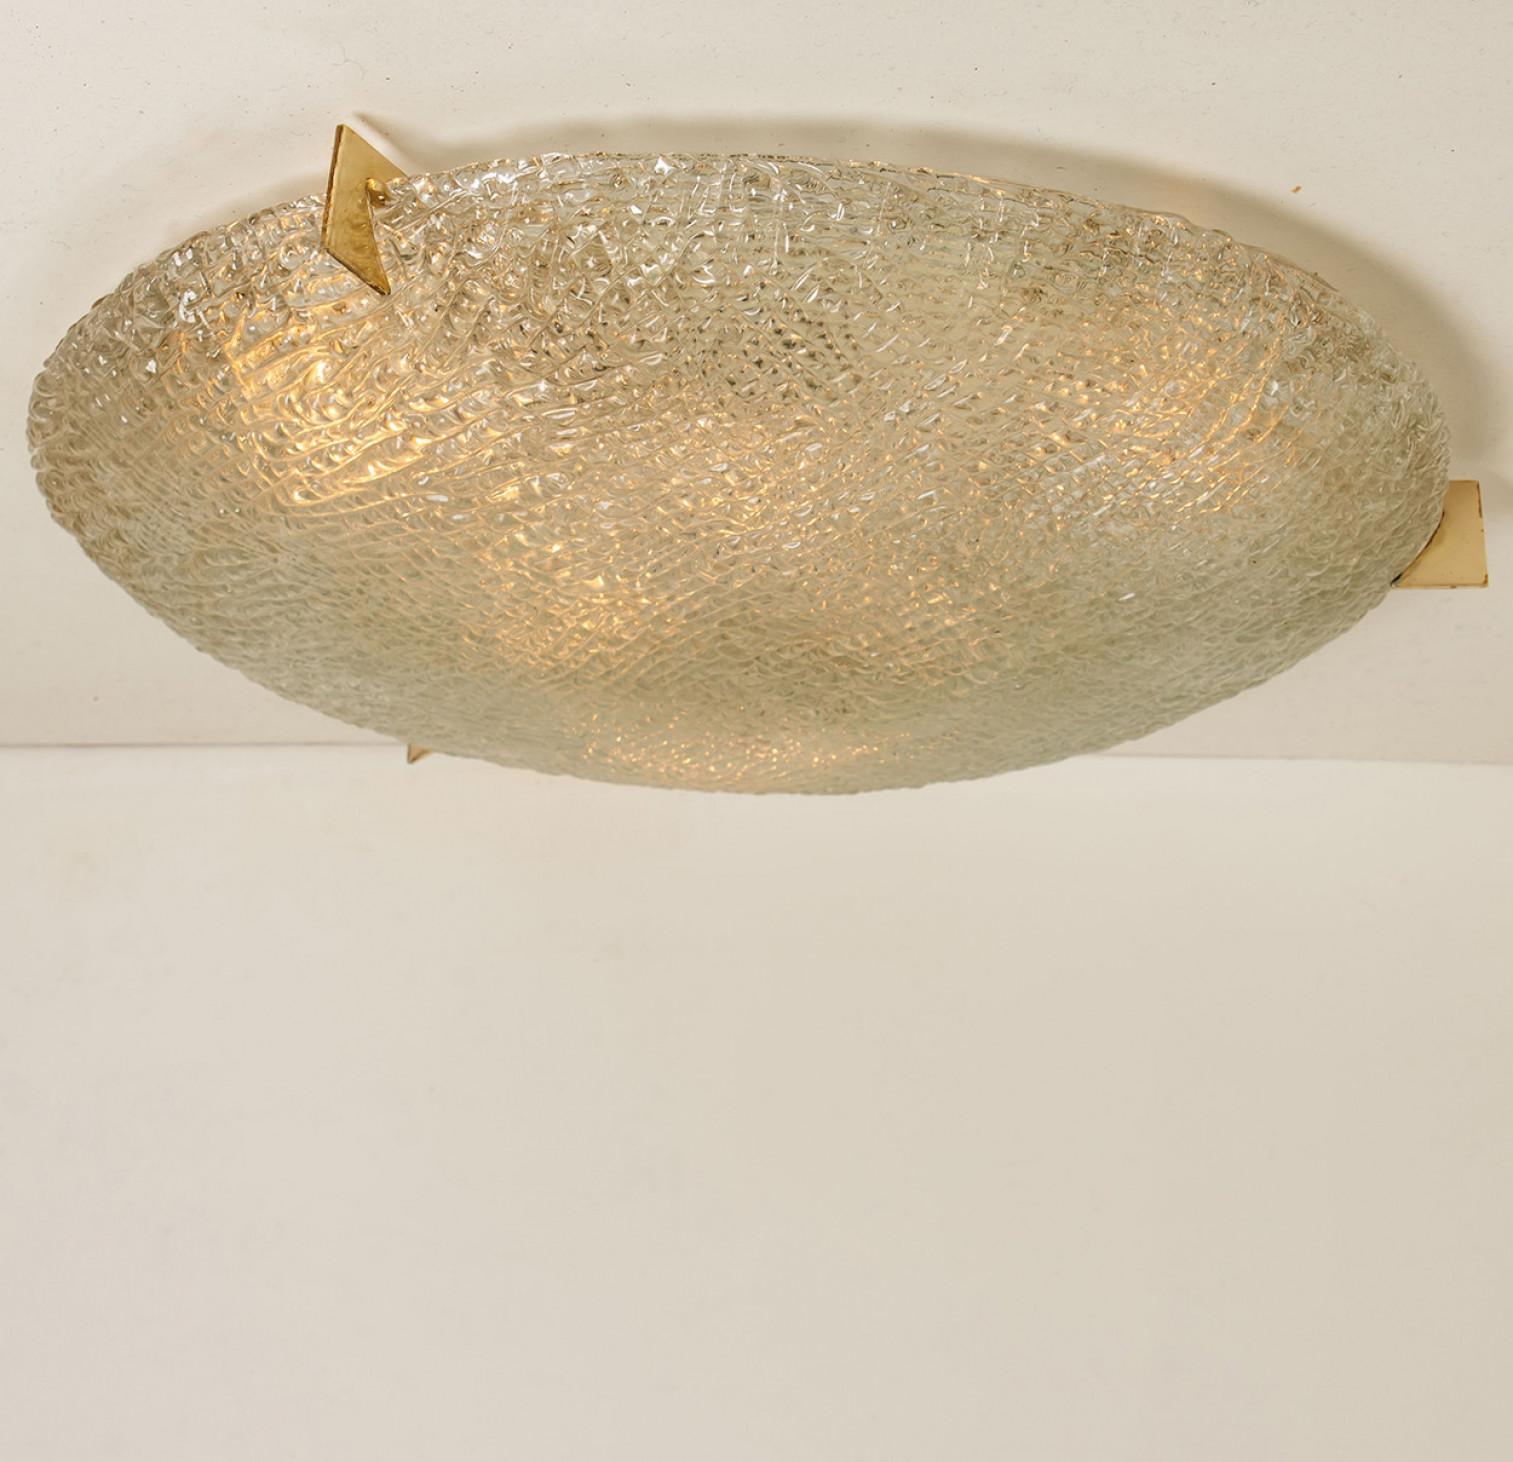 Other Thick Massive Handmade Glass Brass Flush Mount by Hillebrand, 1965 For Sale